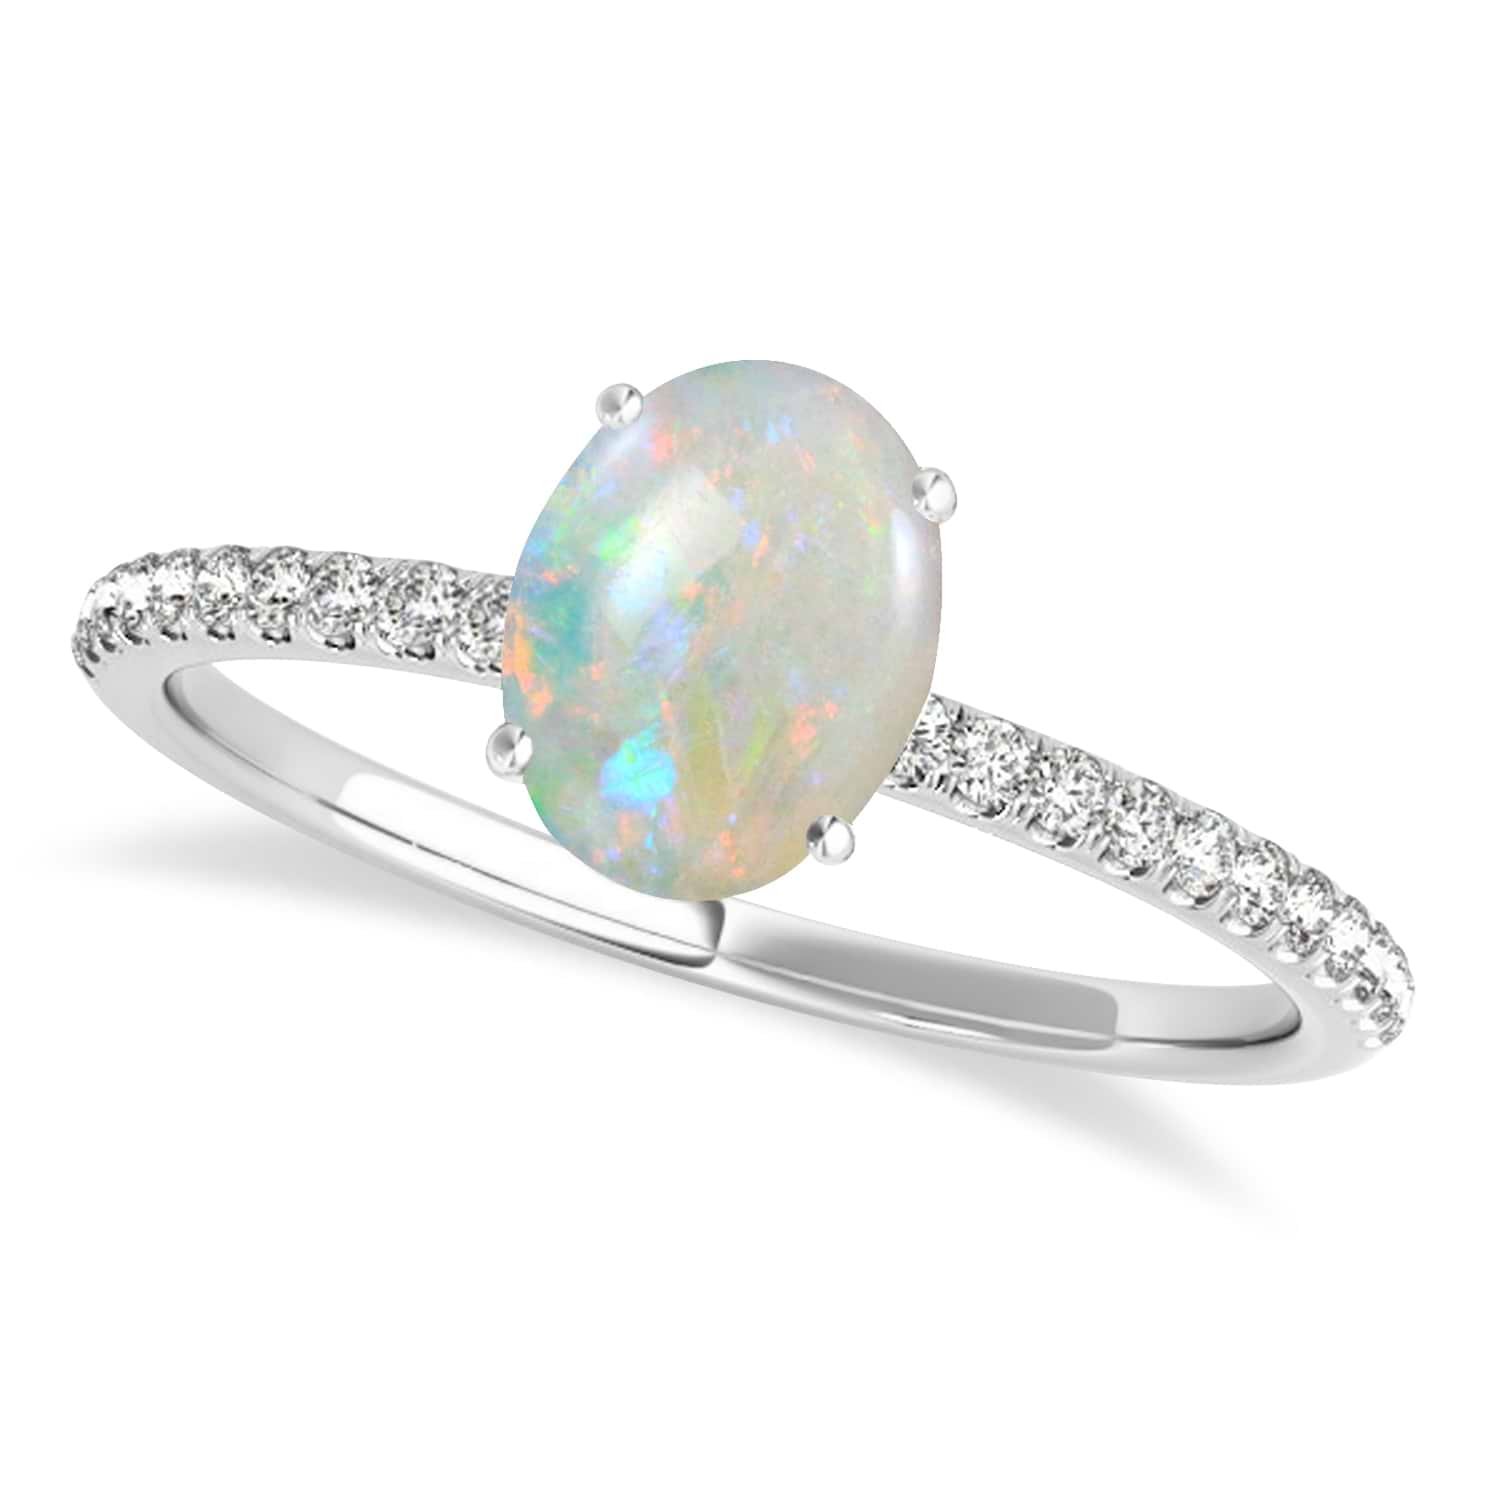 Opal & Diamond Accented Oval Shape Engagement Ring 14k White Gold (1.50ct)